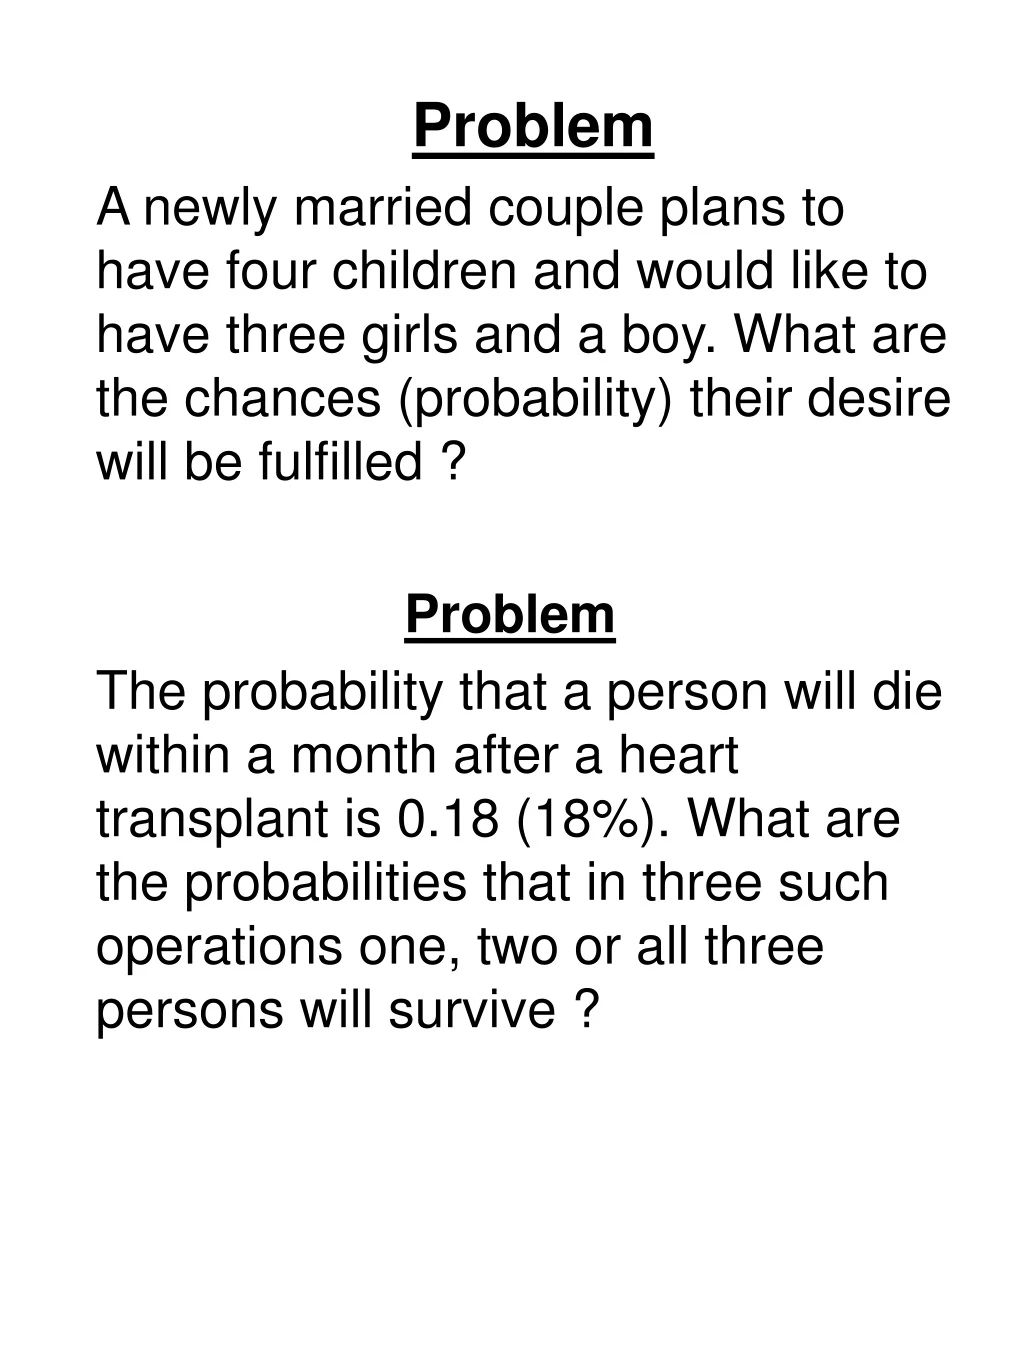 problem a newly married couple plans to have four